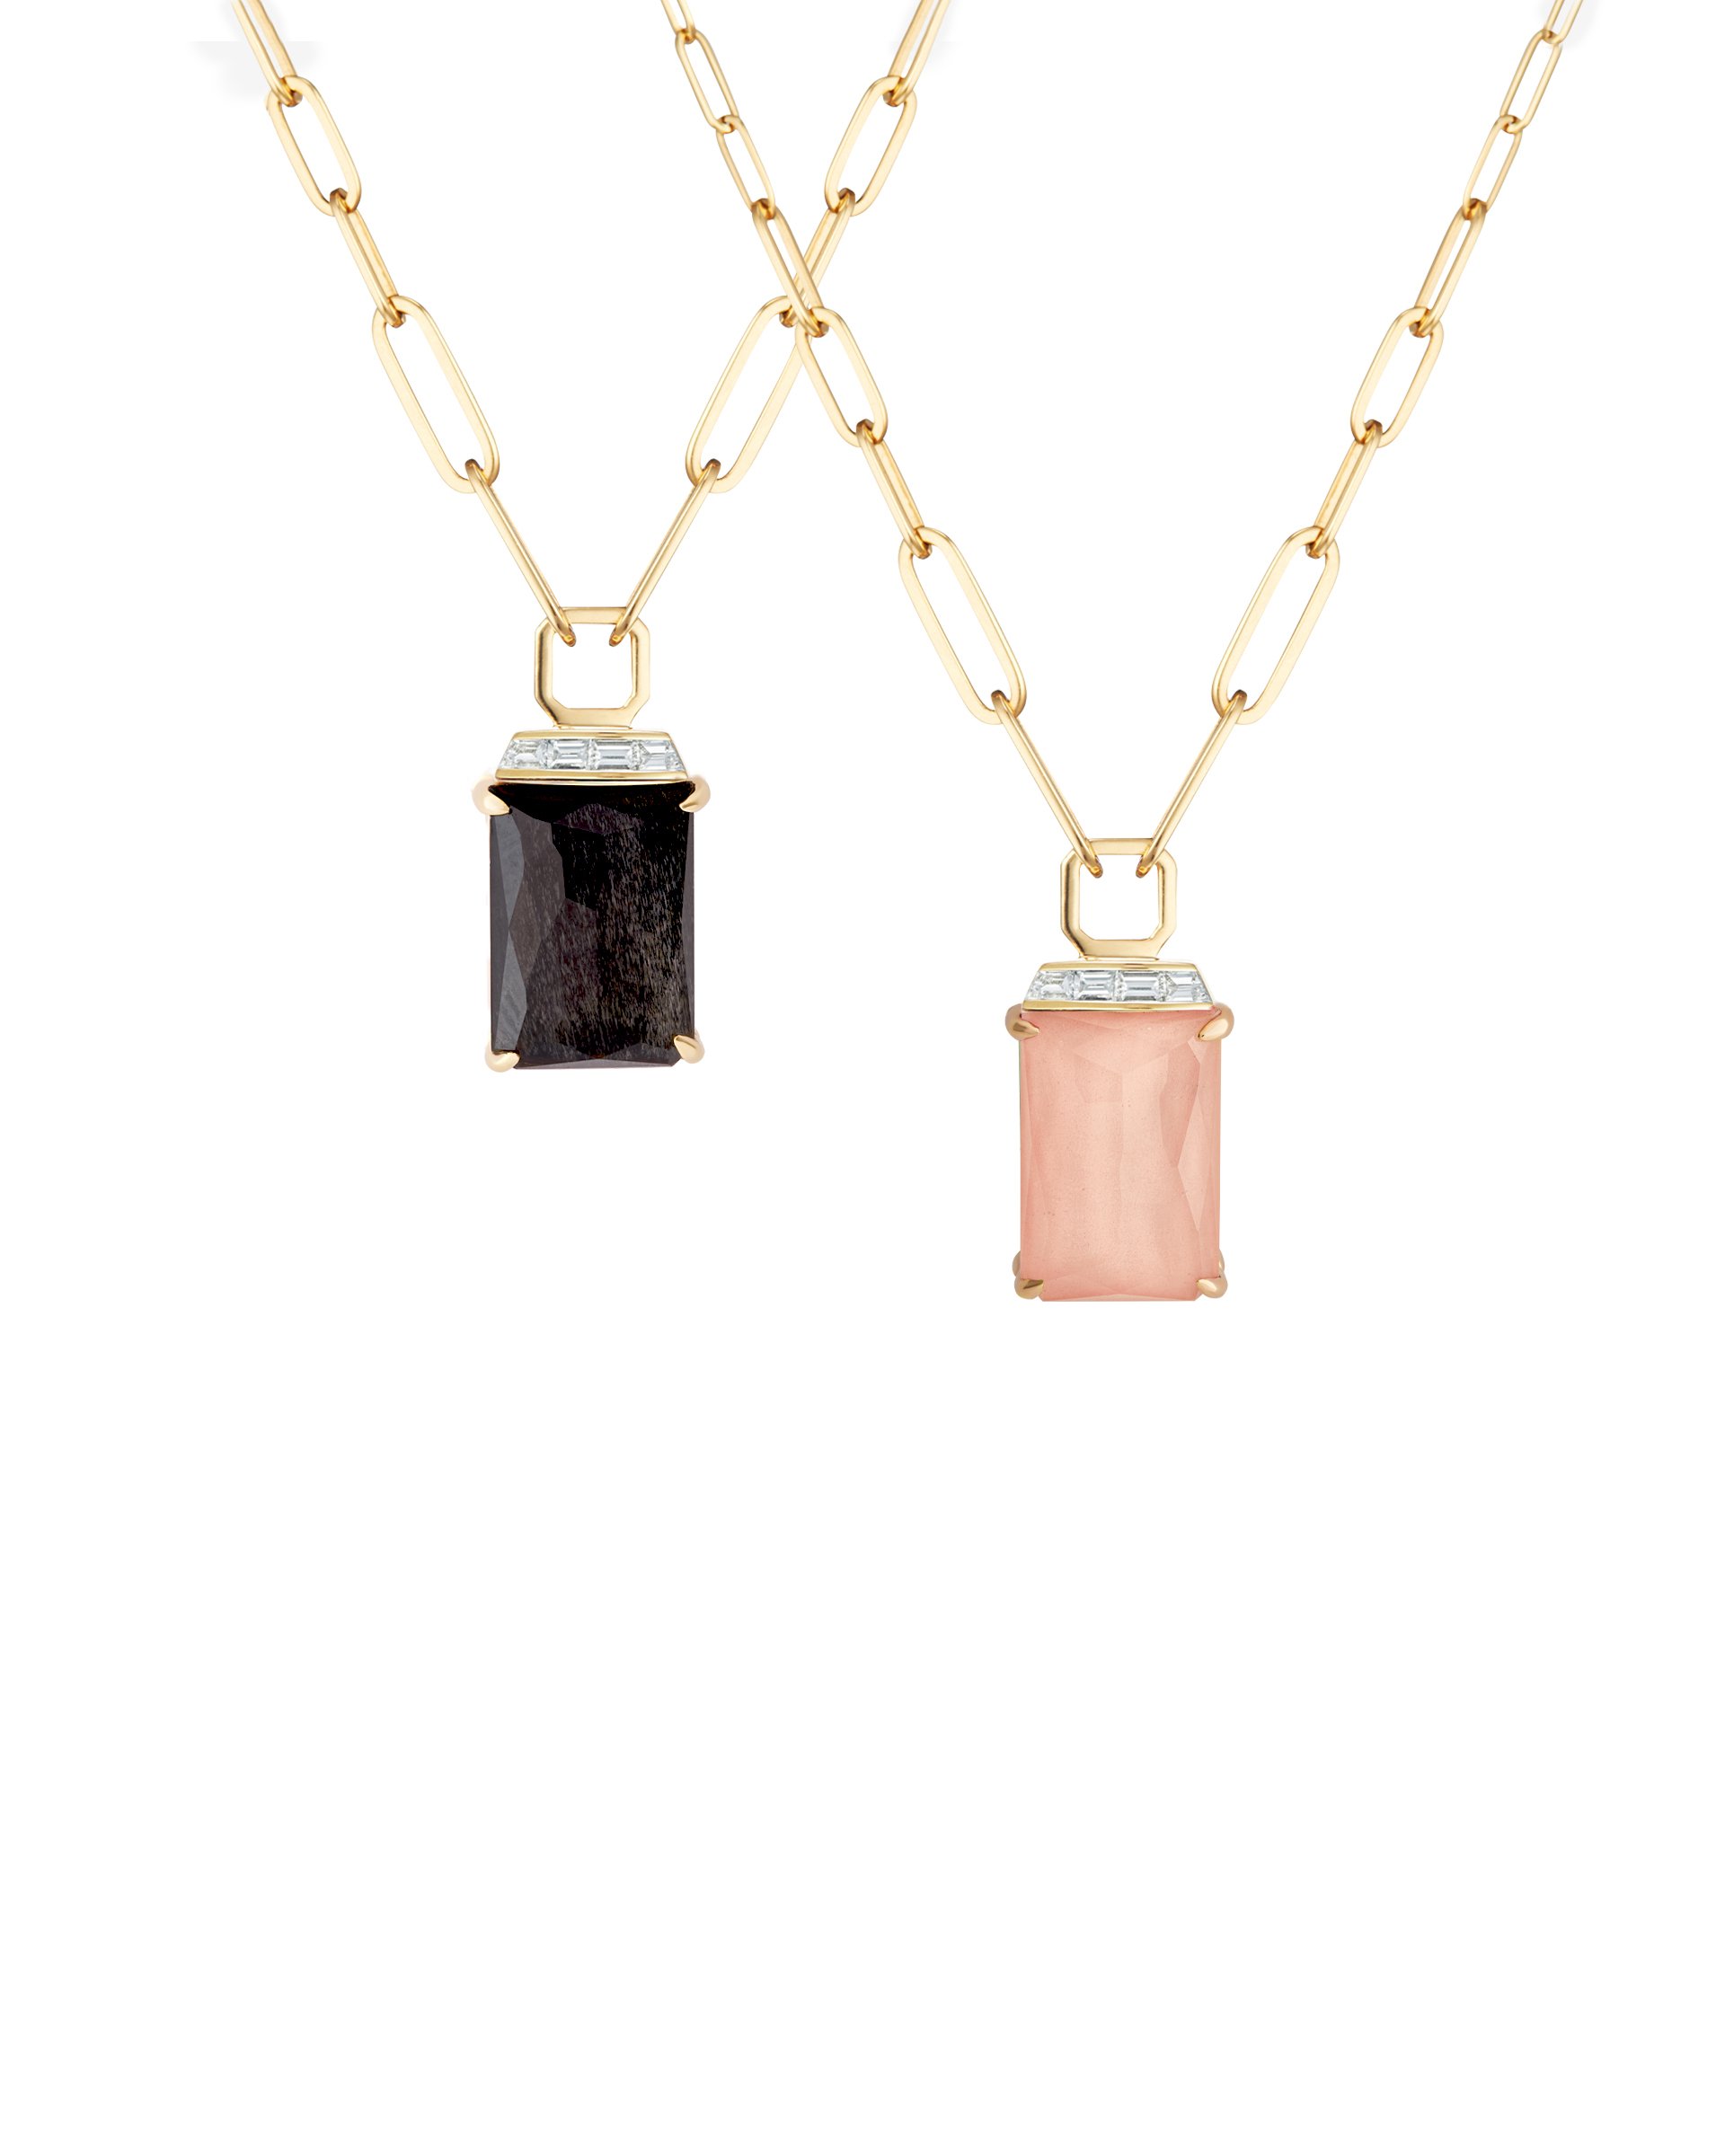 CH2 Tablet Twister Pendant Necklace with Silver Obsidian and Peach Quartz in 18kt Yellow Gold - 18"